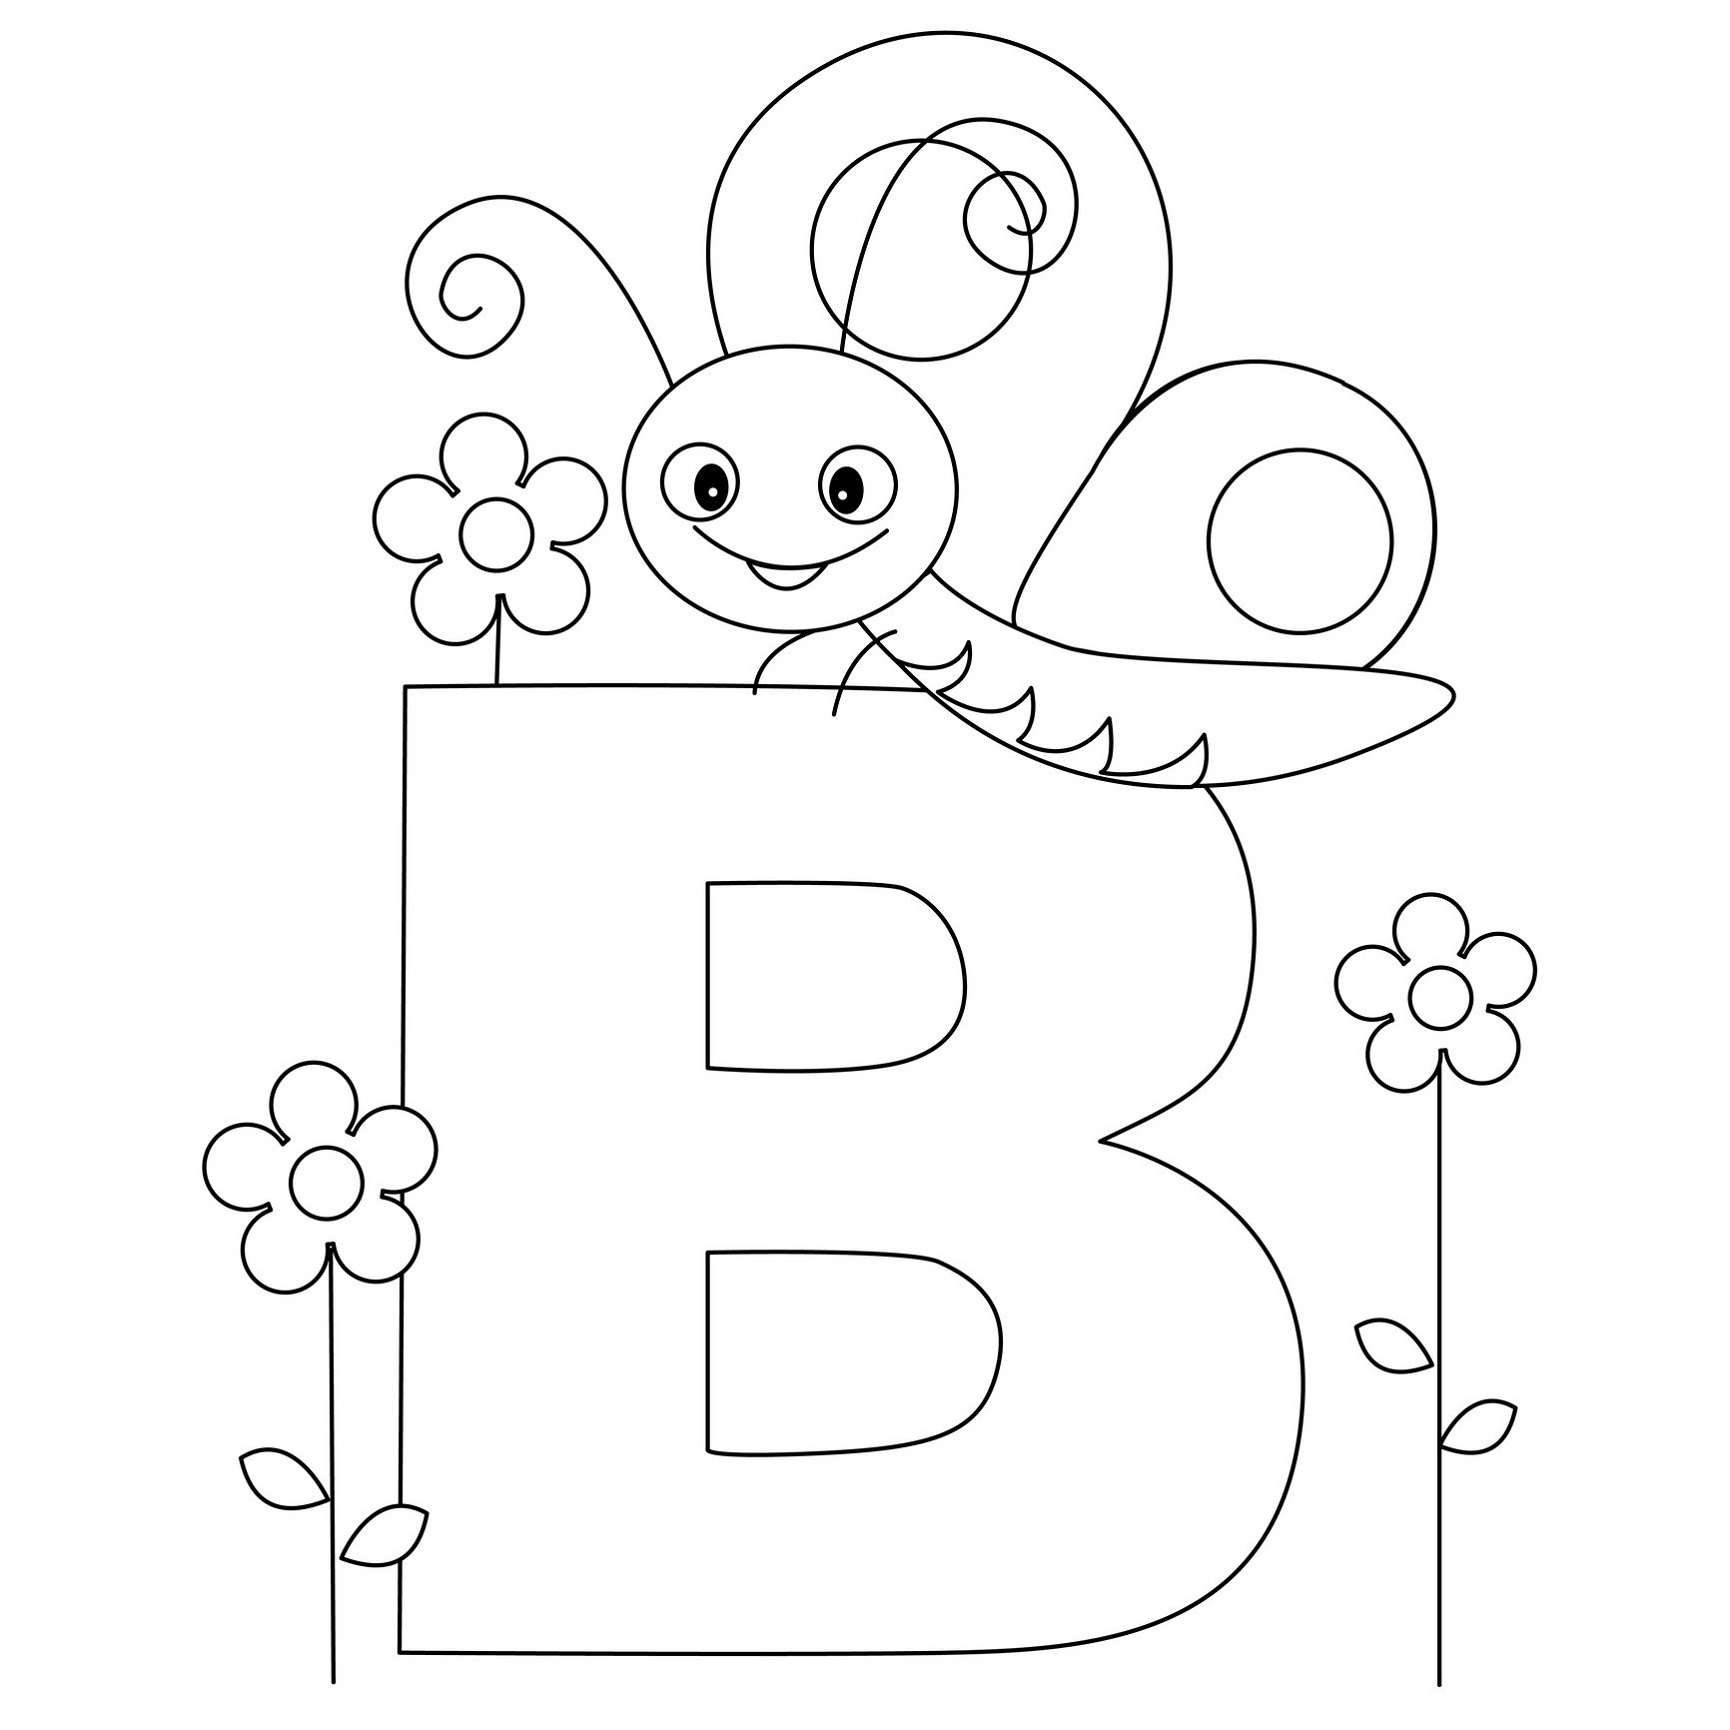 Free Printable Alphabet Coloring Pages Butterfly